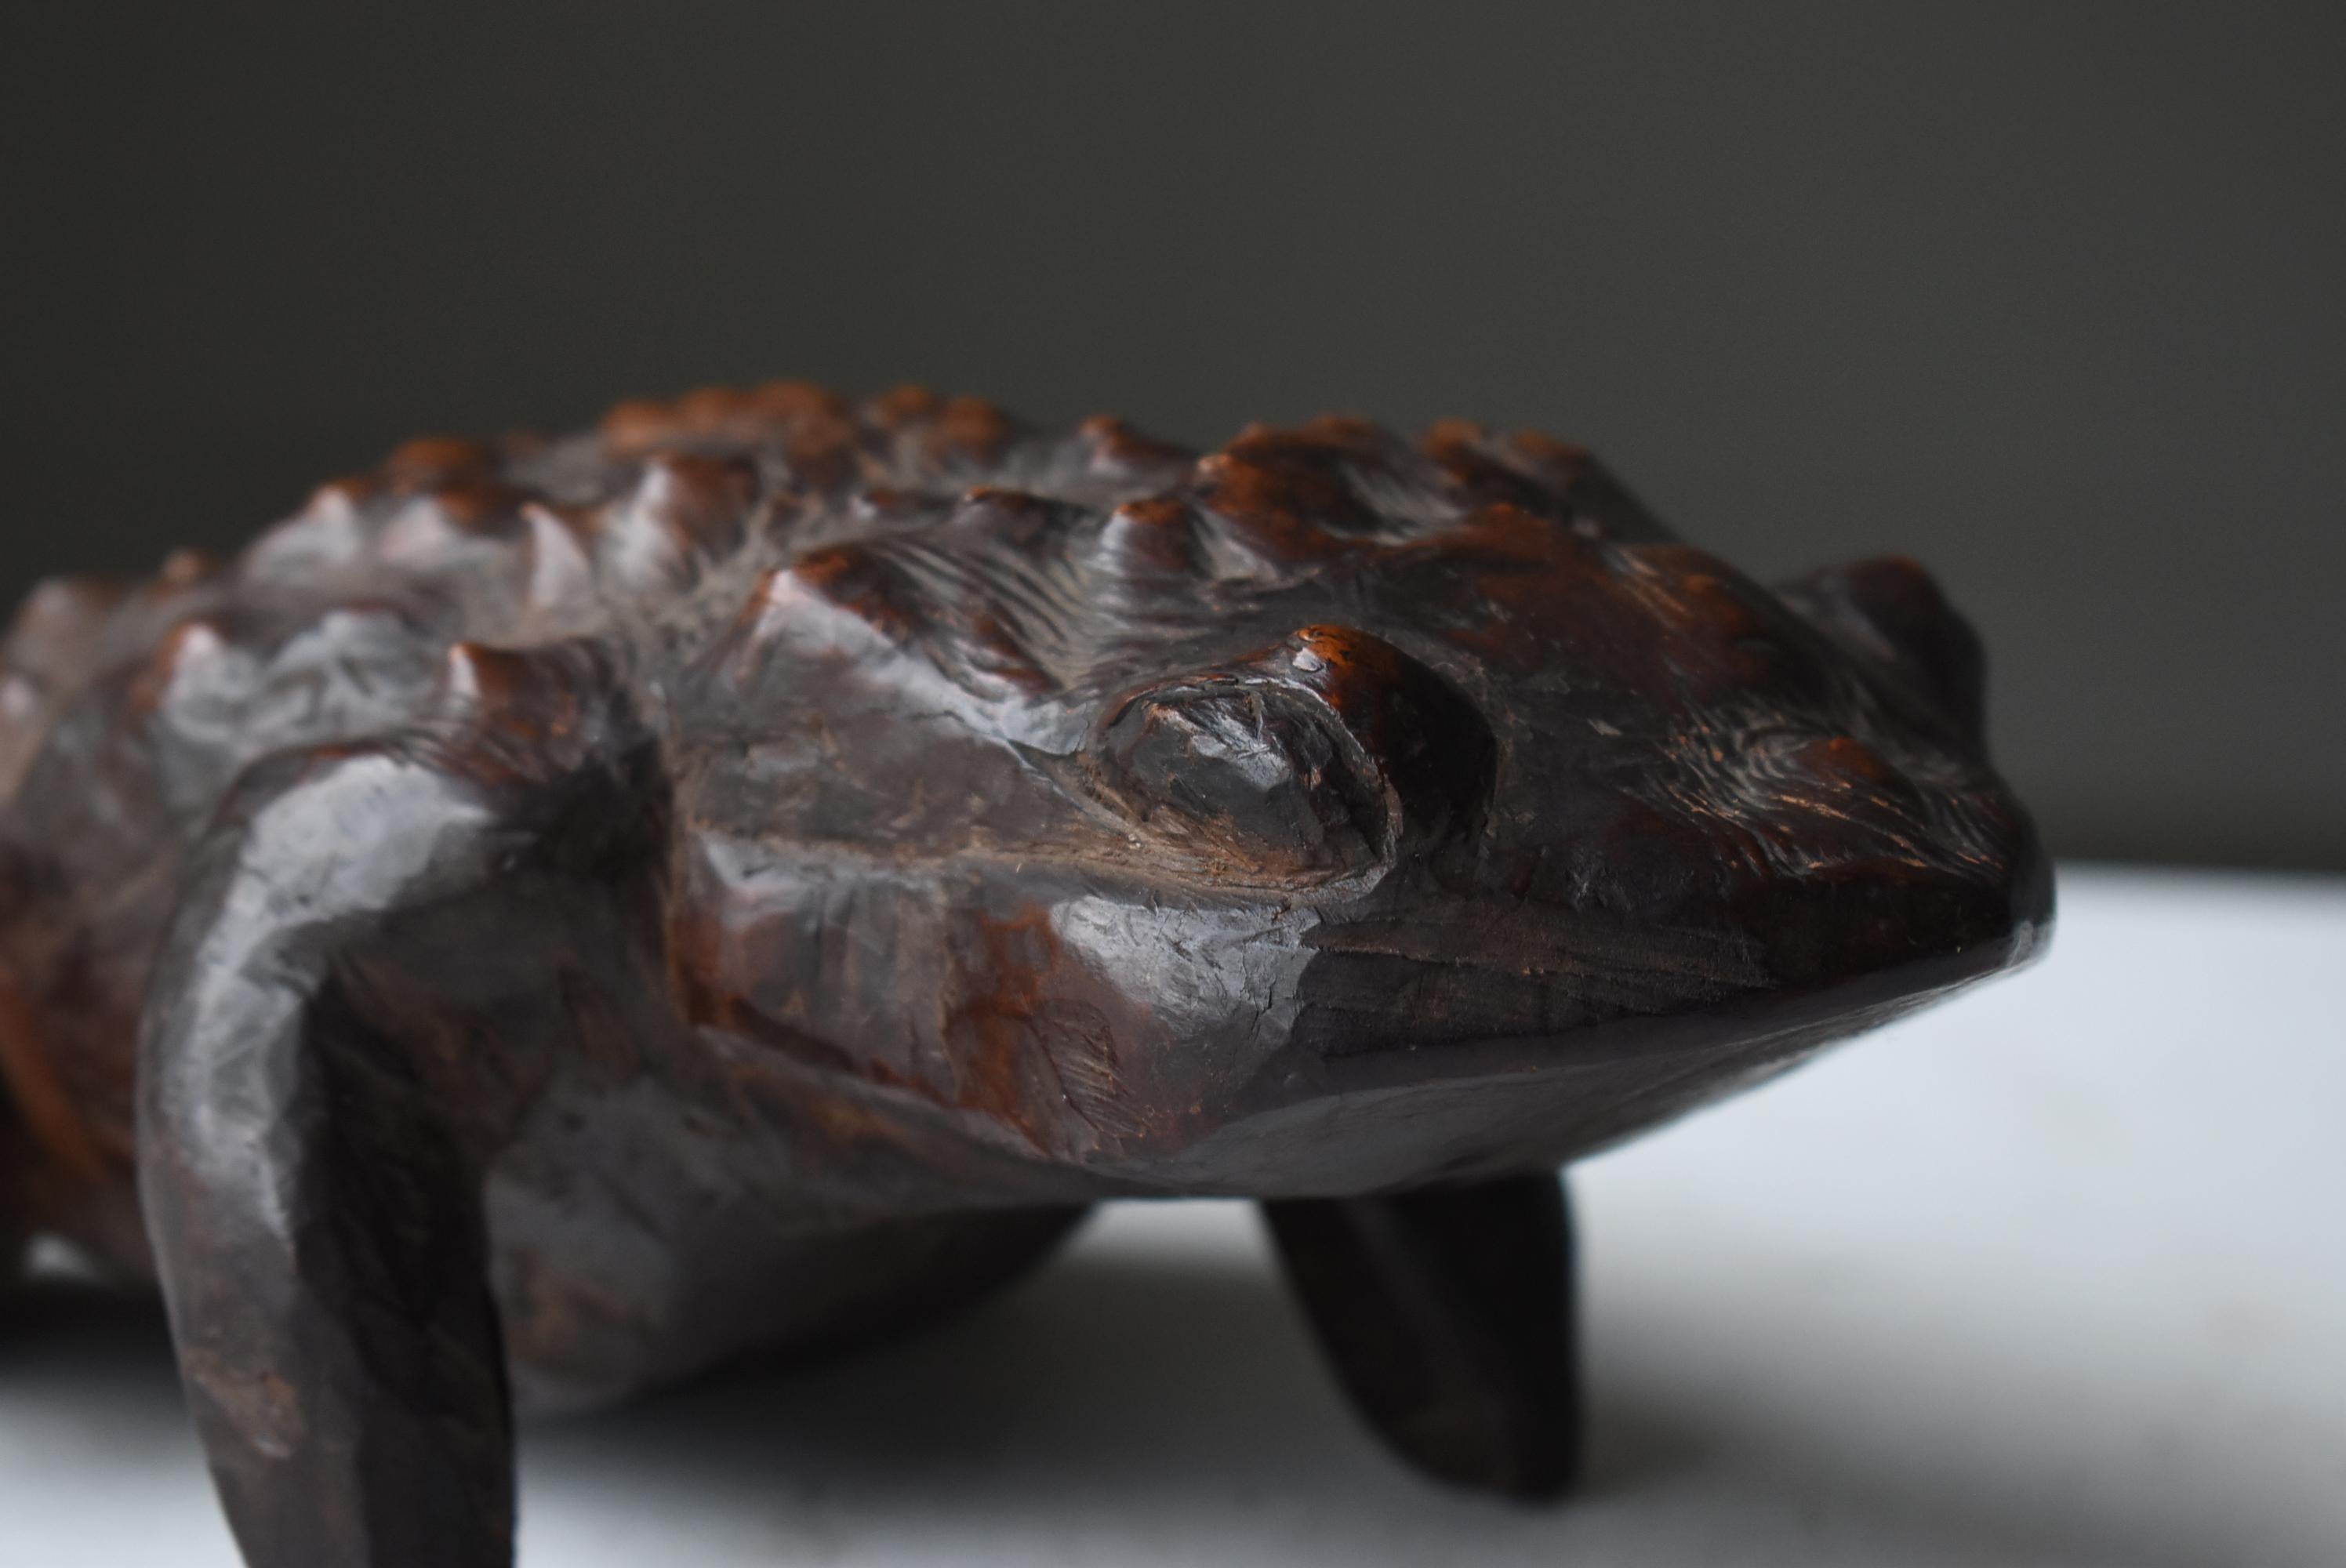 20th Century Japanese Antique Wood Carving Frog 1900s-1940s / Sculpture Wabi Sabi  For Sale